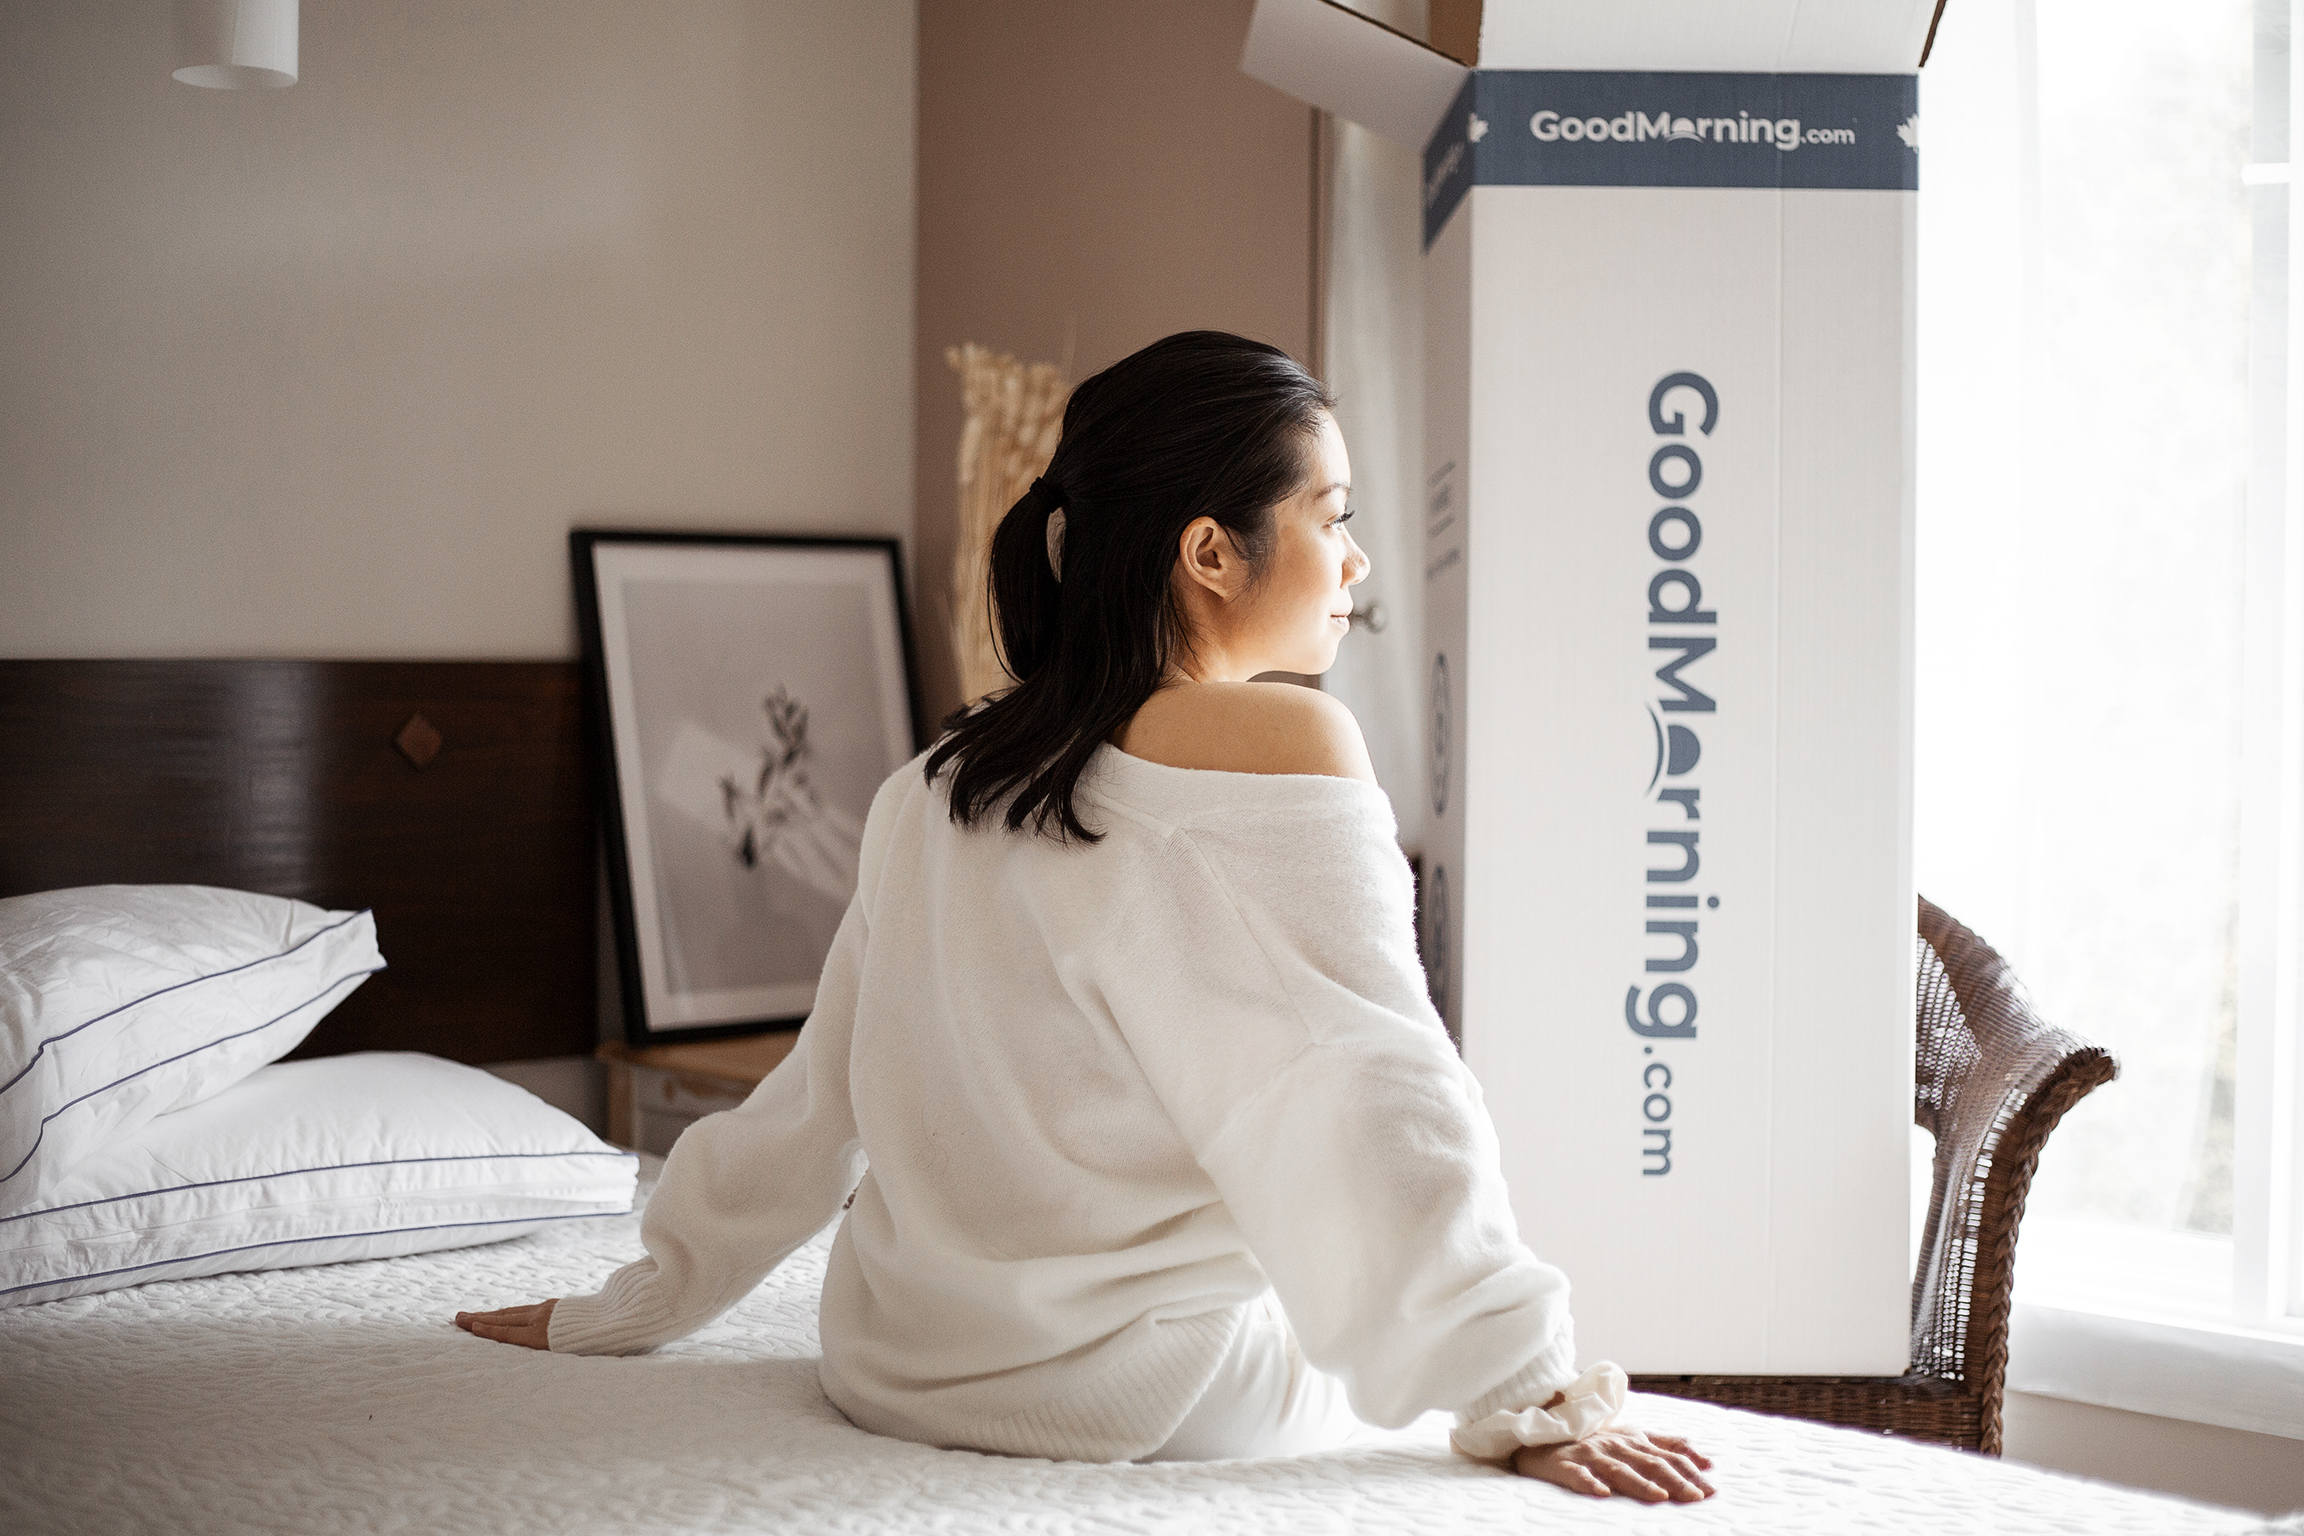 Canadian mattress company GoodMorning.com is pleased to announce it’s been named one of Canada’s Top Growing Companies for a second year in a row in an annual ranking conducted by The Globe & Mail’s Report on Business magazine. 